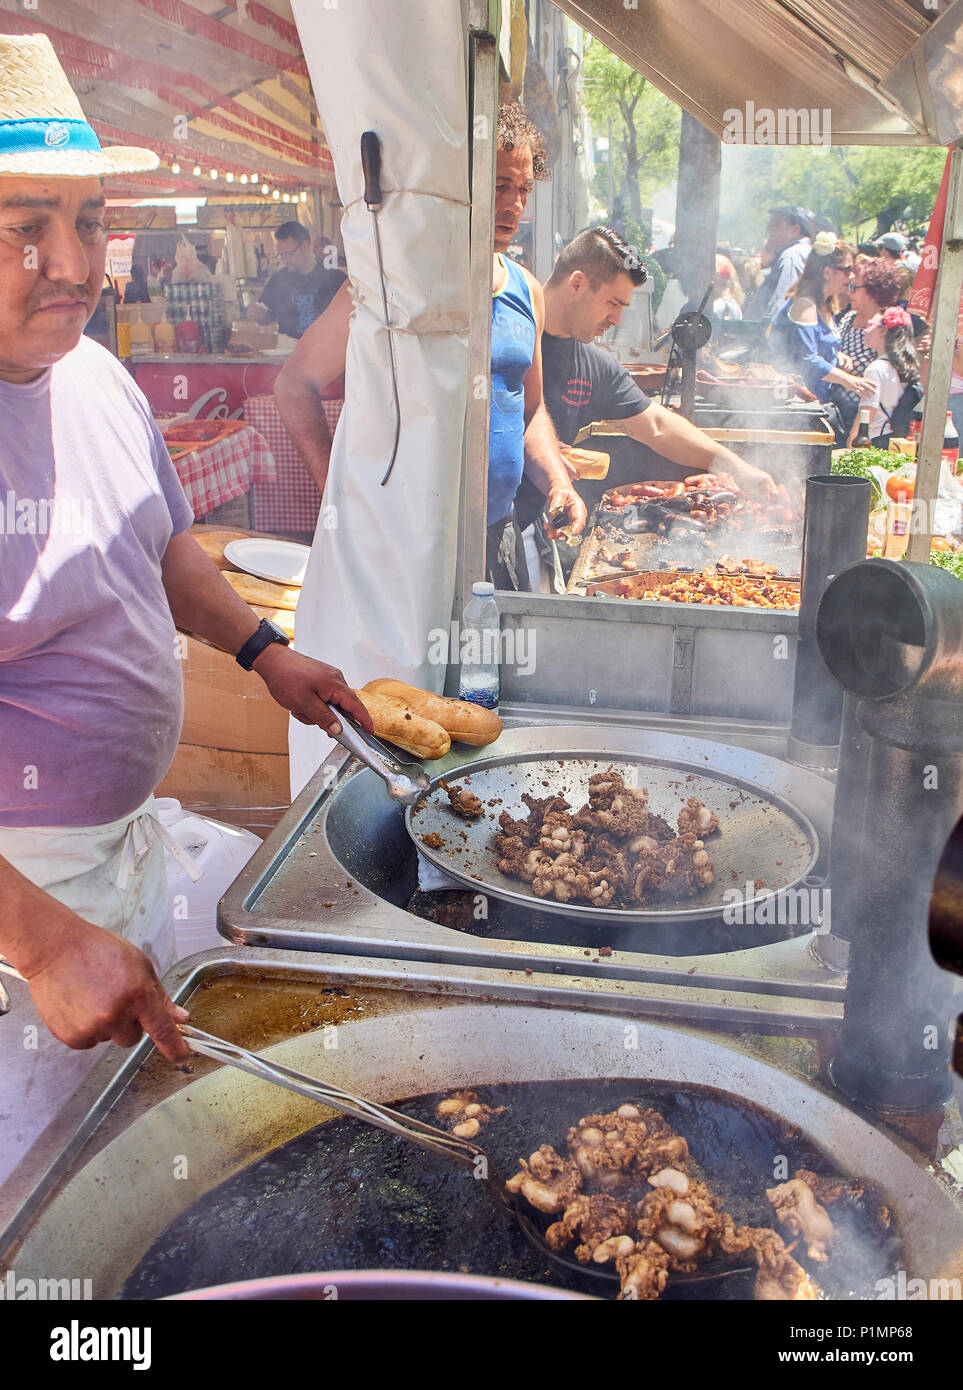 Hispanic cook frying Entresijos (Lamb Mesentery) in a stall of a Street Food fair. Others cookers cooking Sausages and Oreja de Cerdo (Pork Ear) Stock Photo